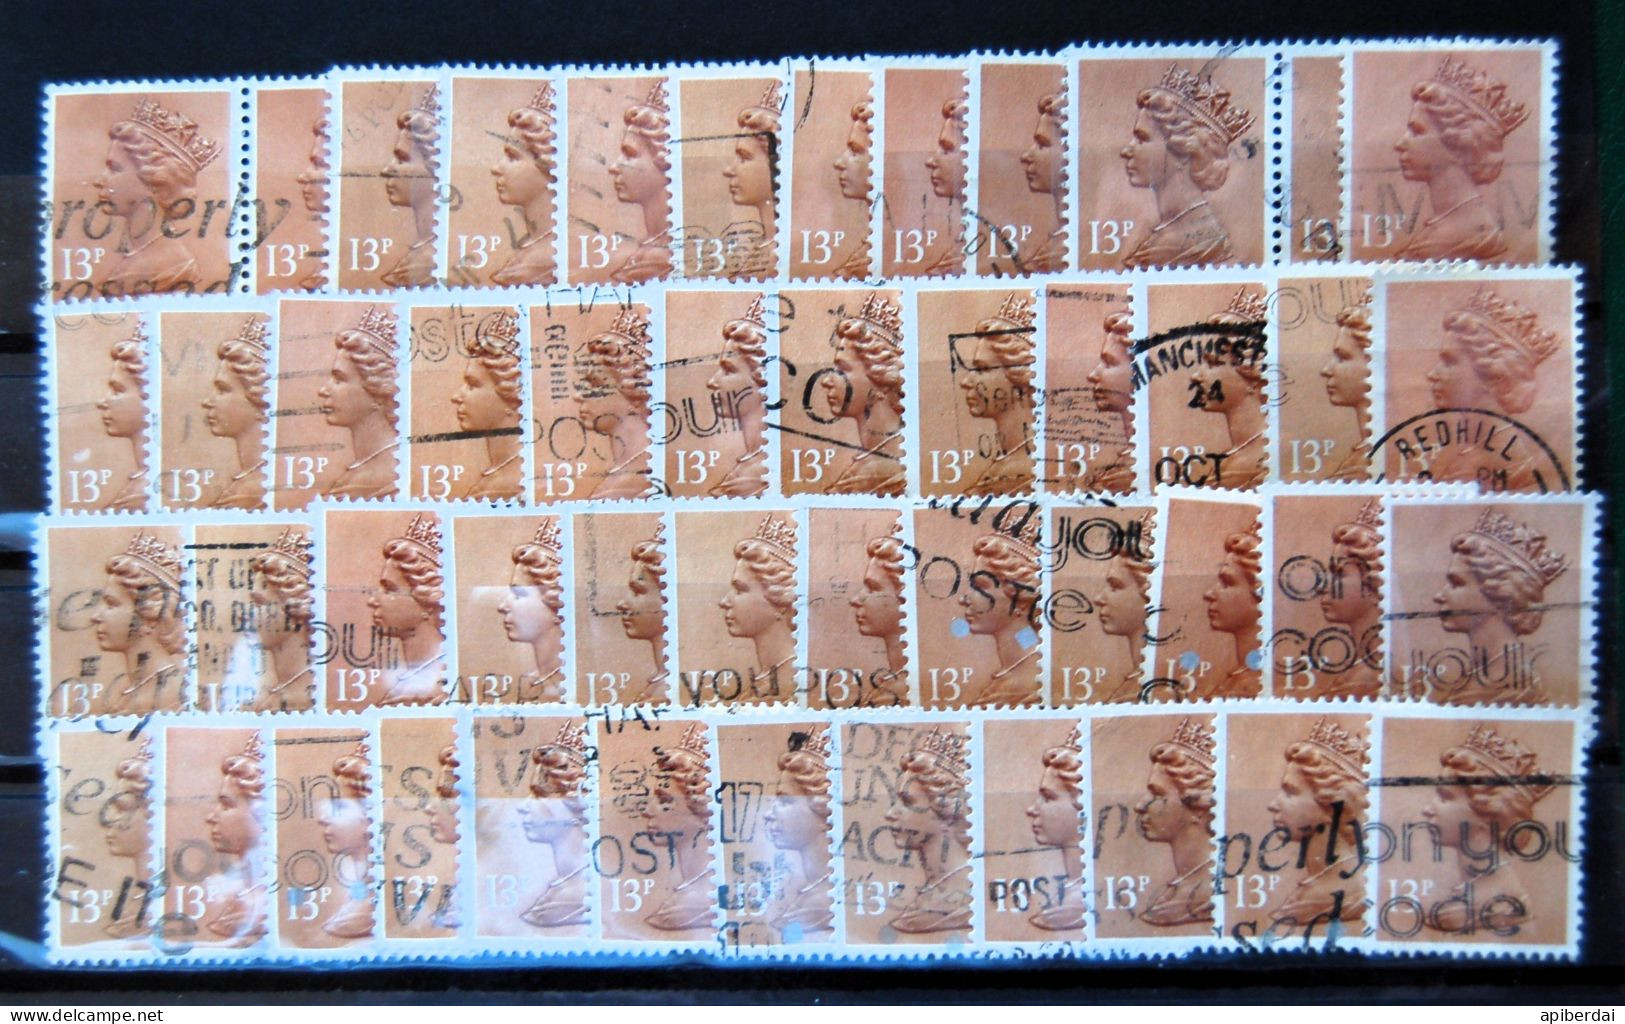 Angleterre Great-britain  - Accumulation Of 48 Machin Stamps 13p Used - Série 'Machin'